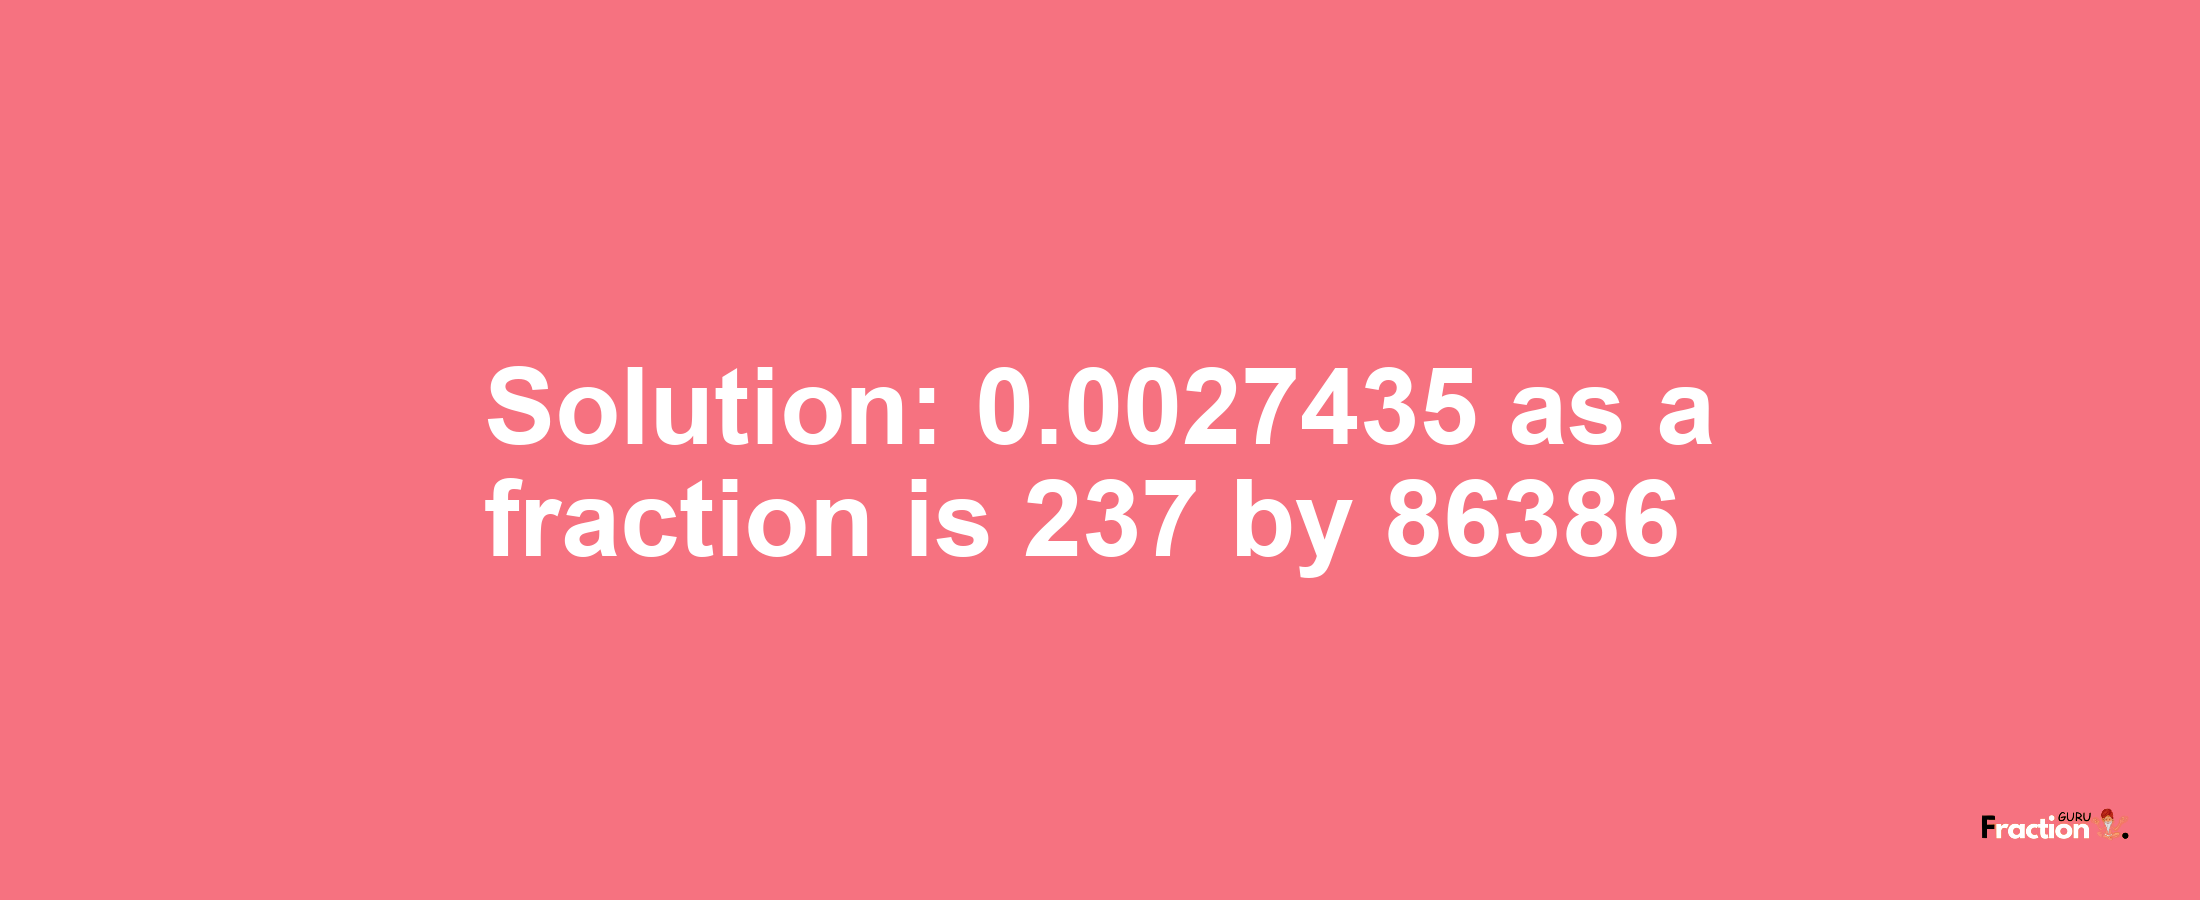 Solution:0.0027435 as a fraction is 237/86386